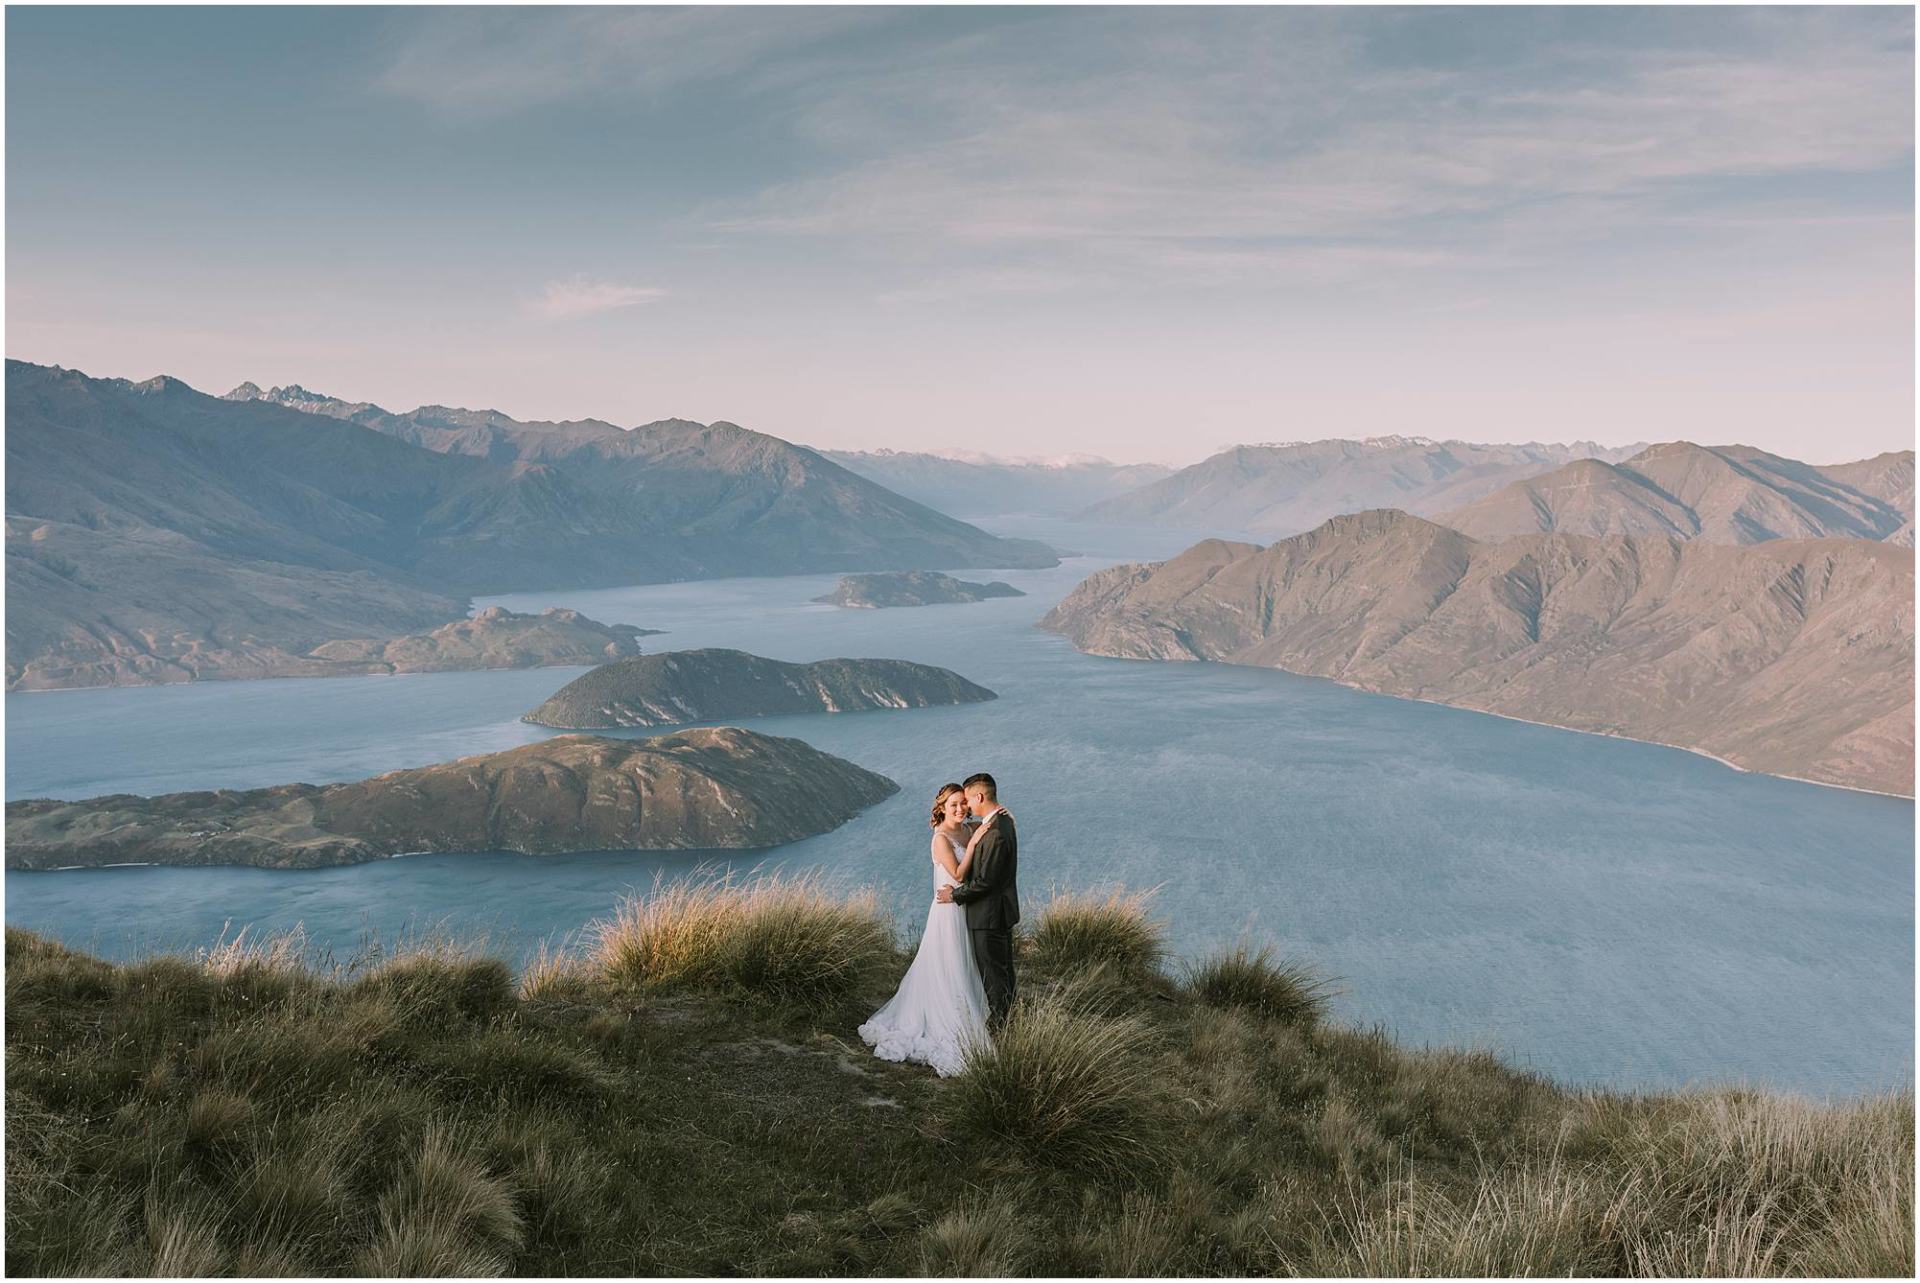 Charlotte Kiri Photography - Pre & Post Wedding Photography breathtaking image of a smiling couple embracing on the edge of Roys Peak, with stunning scenery of lakes and mountains behind them, in Wanaka, New Zealand